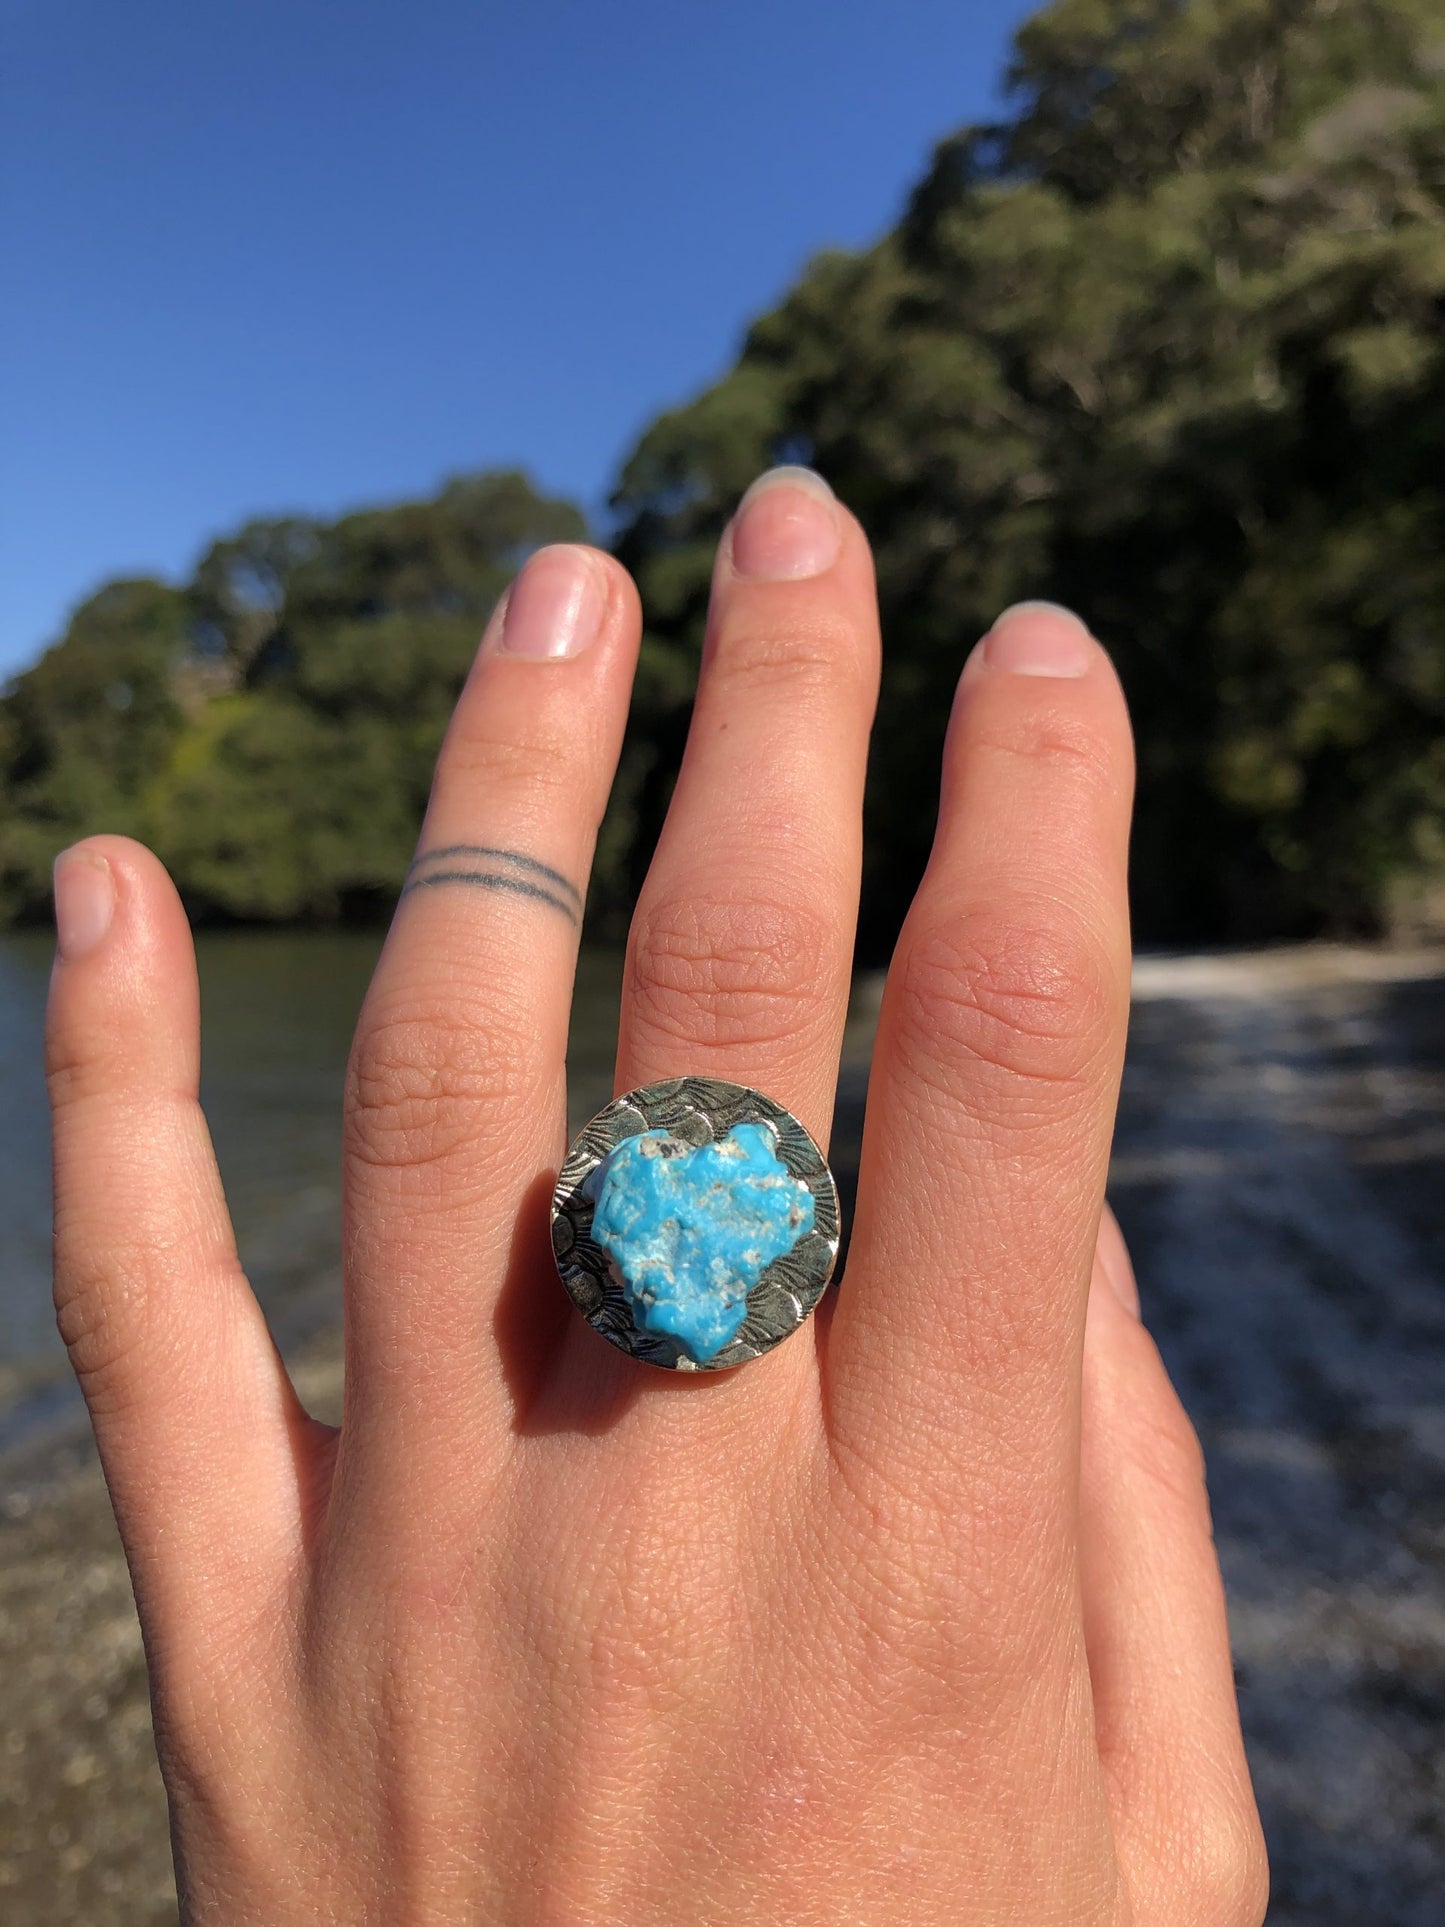 Natural, untreated nugget of Sleeping Beauty turquoisie, brilliant blue with tiny sparkling inclusions of pyrites set in a silver plated adjustable ring